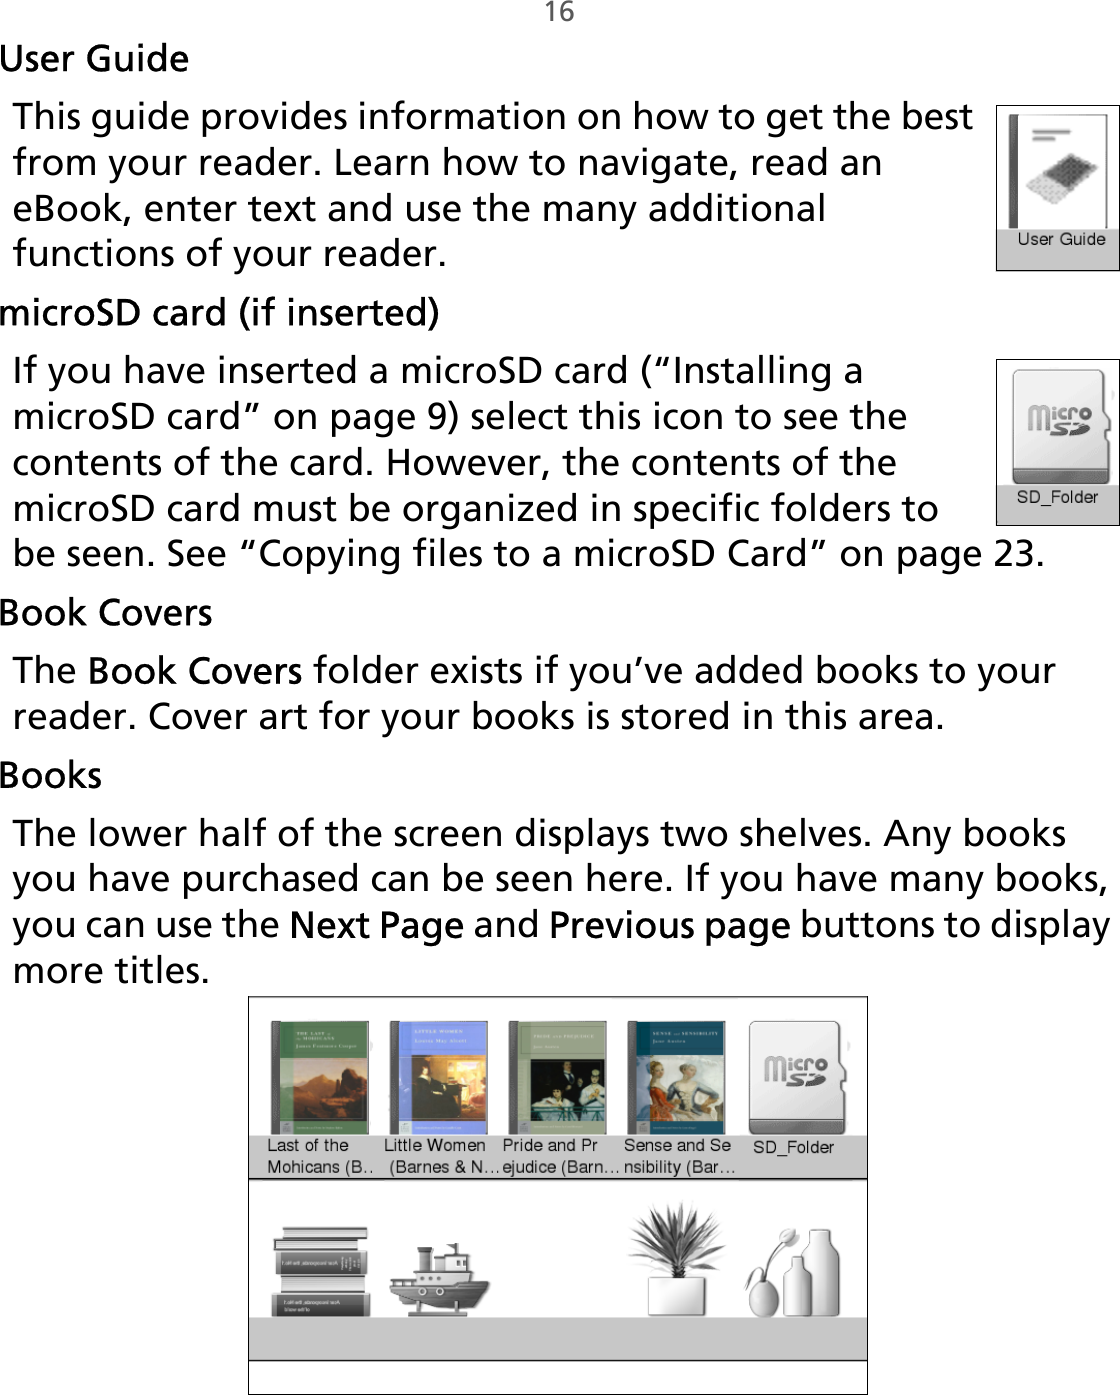 16User GuideThis guide provides information on how to get the best from your reader. Learn how to navigate, read an eBook, enter text and use the many additional functions of your reader.microSD card (if inserted)If you have inserted a microSD card (“Installing a microSD card” on page 9) select this icon to see the contents of the card. However, the contents of the microSD card must be organized in specific folders to be seen. See “Copying files to a microSD Card” on page 23.Book CoversThe Book Covers folder exists if you’ve added books to your reader. Cover art for your books is stored in this area.BooksThe lower half of the screen displays two shelves. Any books you have purchased can be seen here. If you have many books, you can use the Next Page and Previous page buttons to display more titles. 